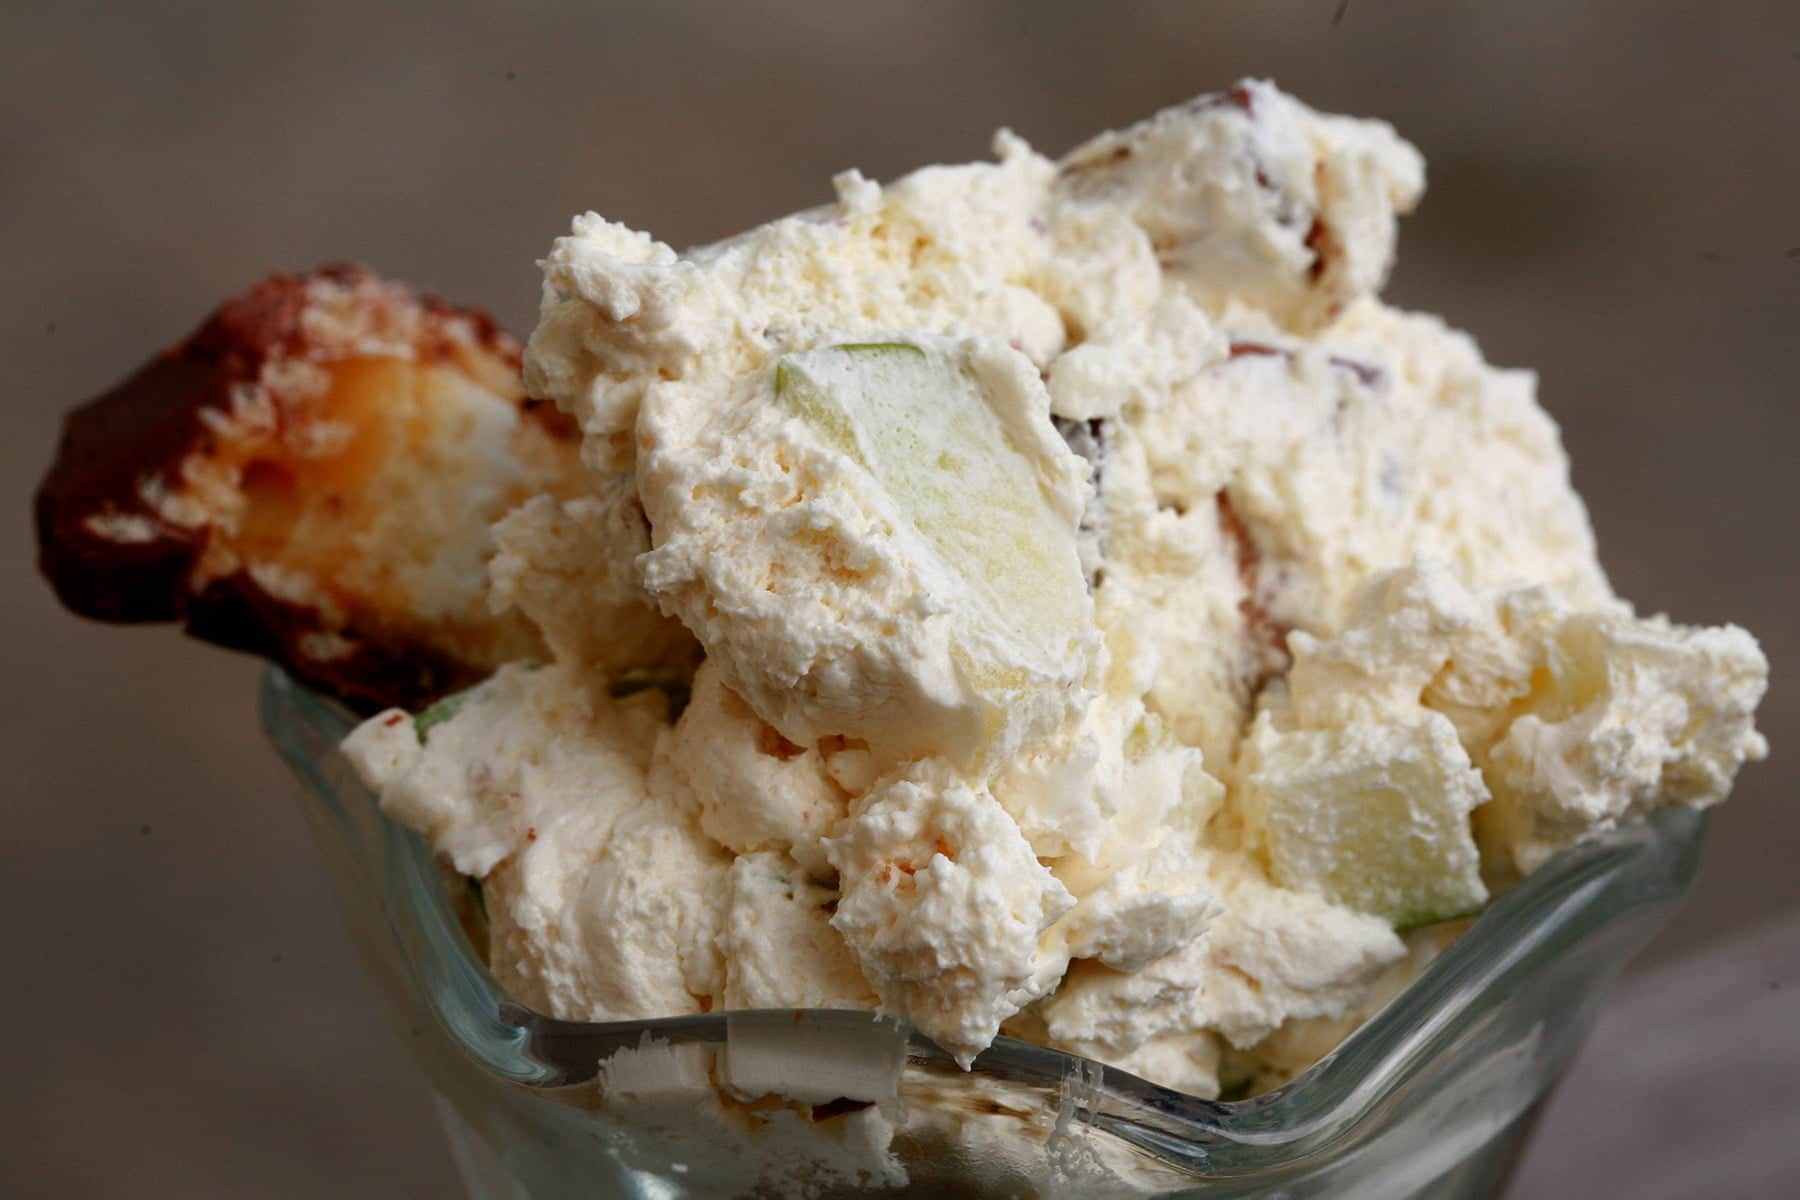 A fluted dessert bowl with Canadian Candy Bar Salad - an off-white, fluffy whipped cream based dessert with chunks of apple and candy bar visible throughout.